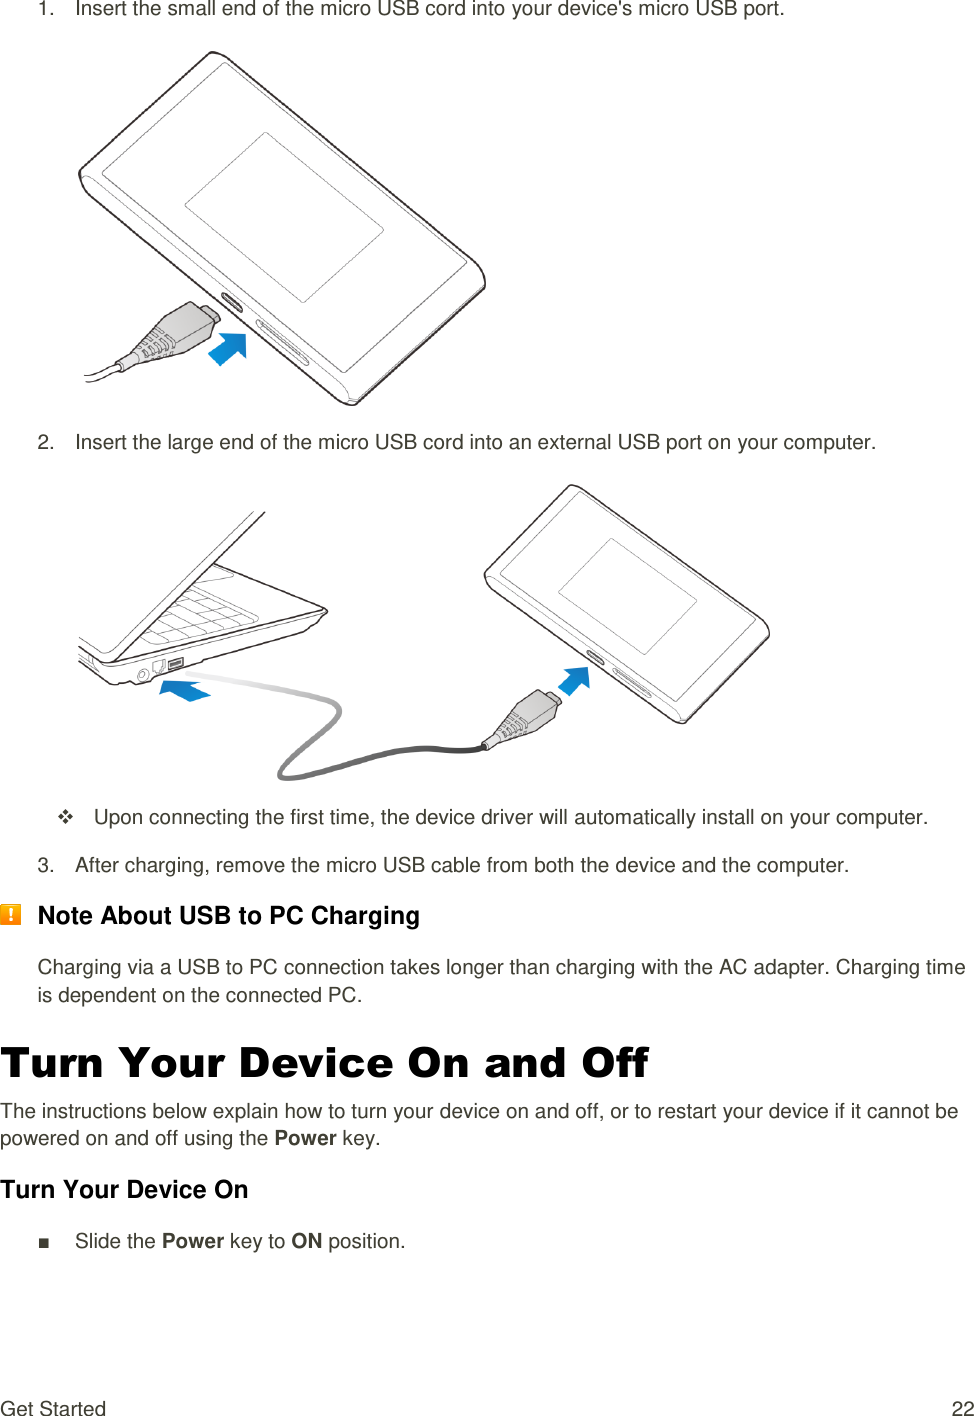 Get Started  22 1.  Insert the small end of the micro USB cord into your device&apos;s micro USB port.    2.  Insert the large end of the micro USB cord into an external USB port on your computer.     Upon connecting the first time, the device driver will automatically install on your computer. 3.  After charging, remove the micro USB cable from both the device and the computer.  Note About USB to PC Charging Charging via a USB to PC connection takes longer than charging with the AC adapter. Charging time is dependent on the connected PC. Turn Your Device On and Off The instructions below explain how to turn your device on and off, or to restart your device if it cannot be powered on and off using the Power key. Turn Your Device On ■  Slide the Power key to ON position. 